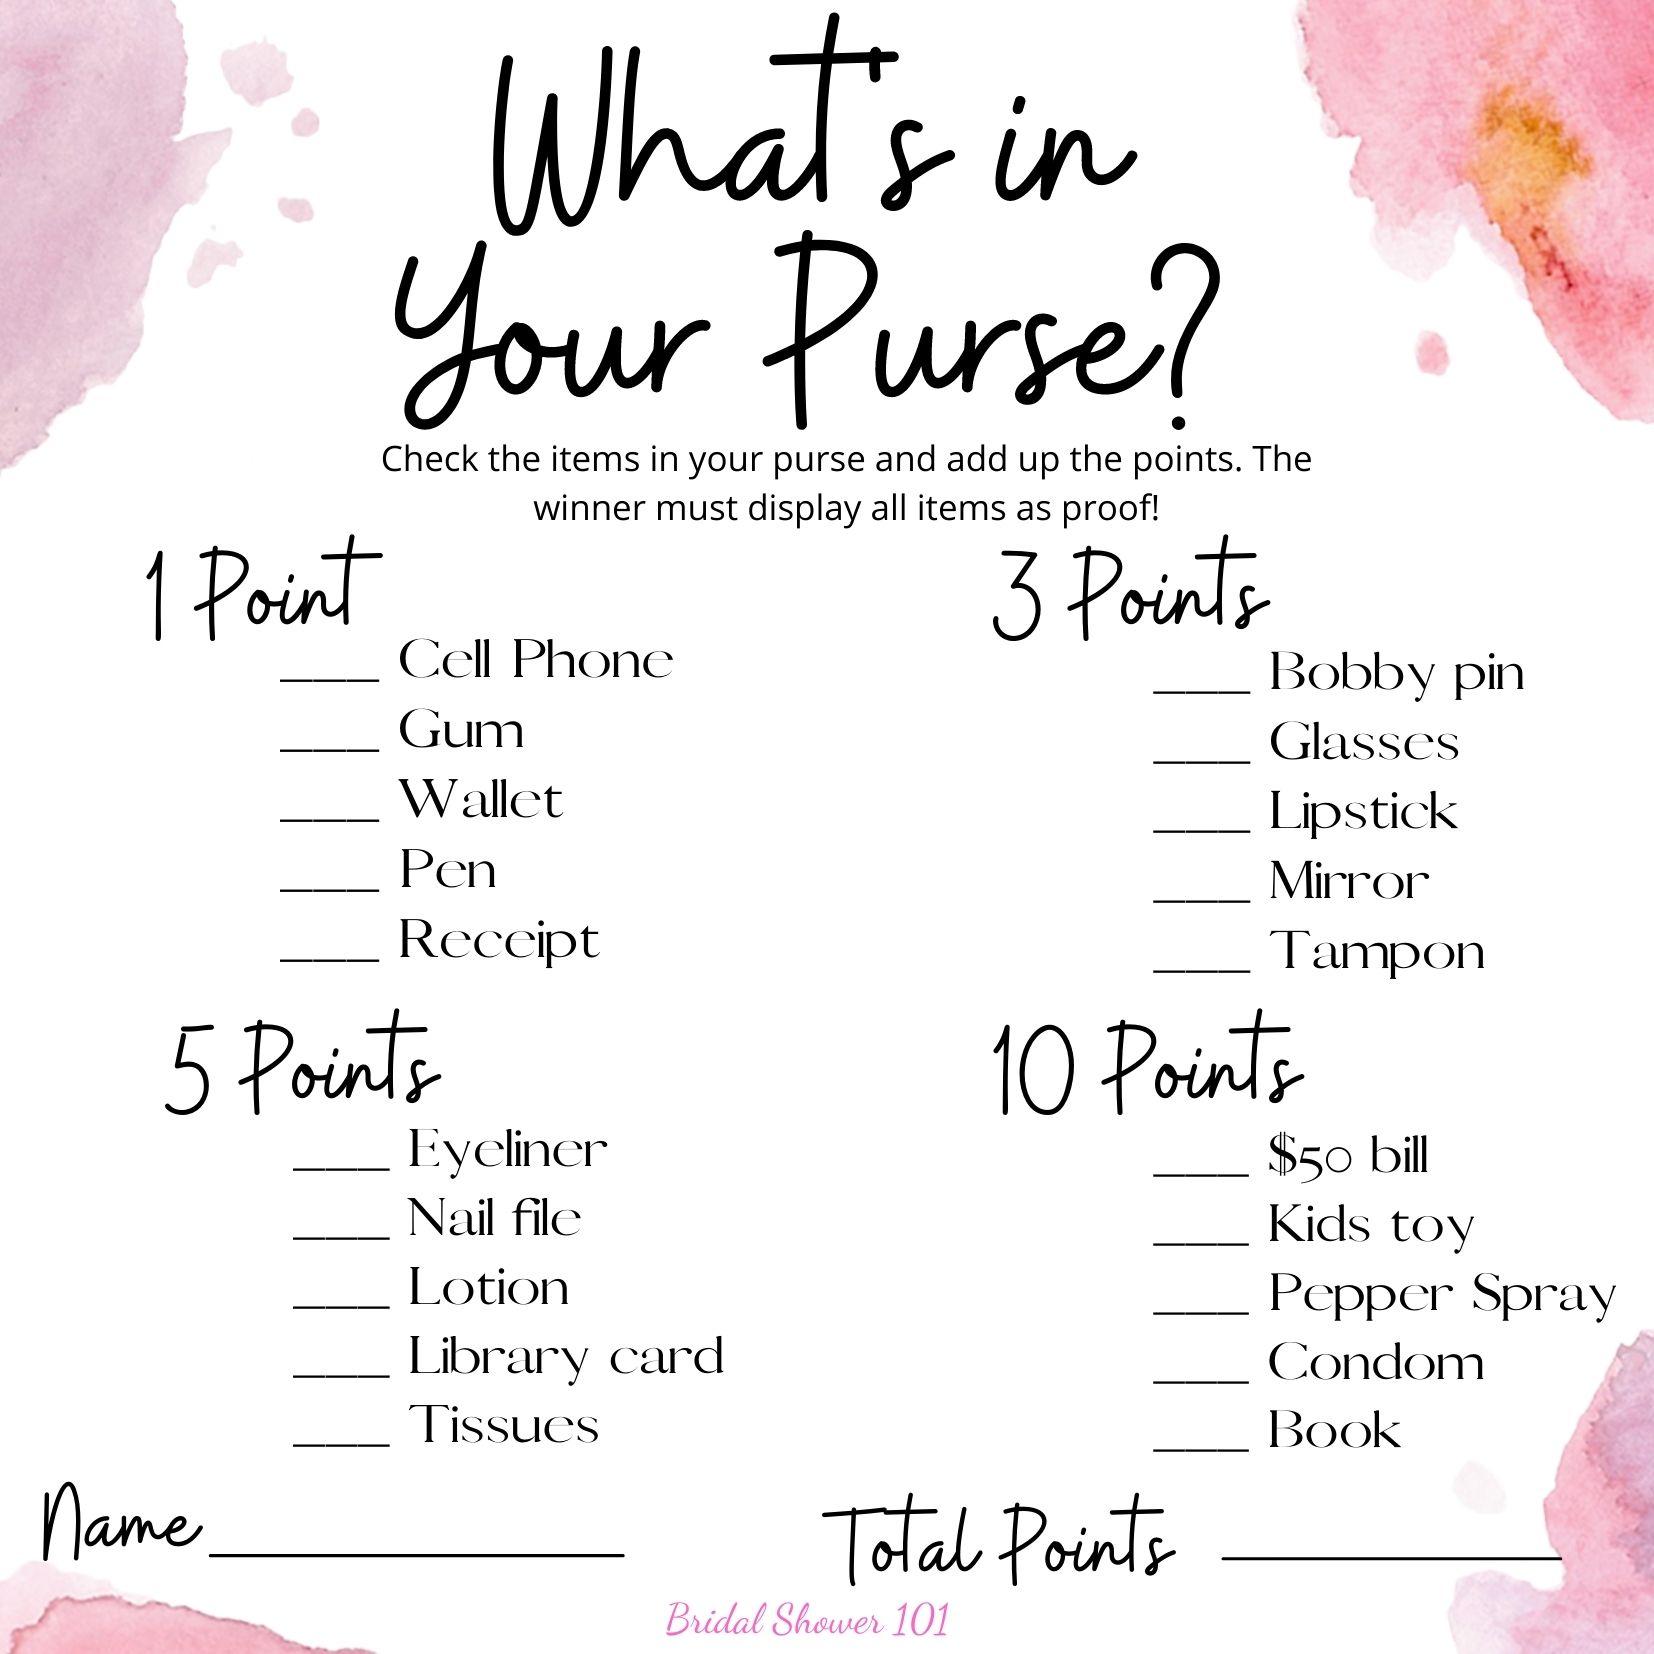 Purse Hunt Purse Raid Deer Antlers Whats In Your Purse Game Pink Gray Bridal Shower Printable Bachelorette Party Instant MVR4R